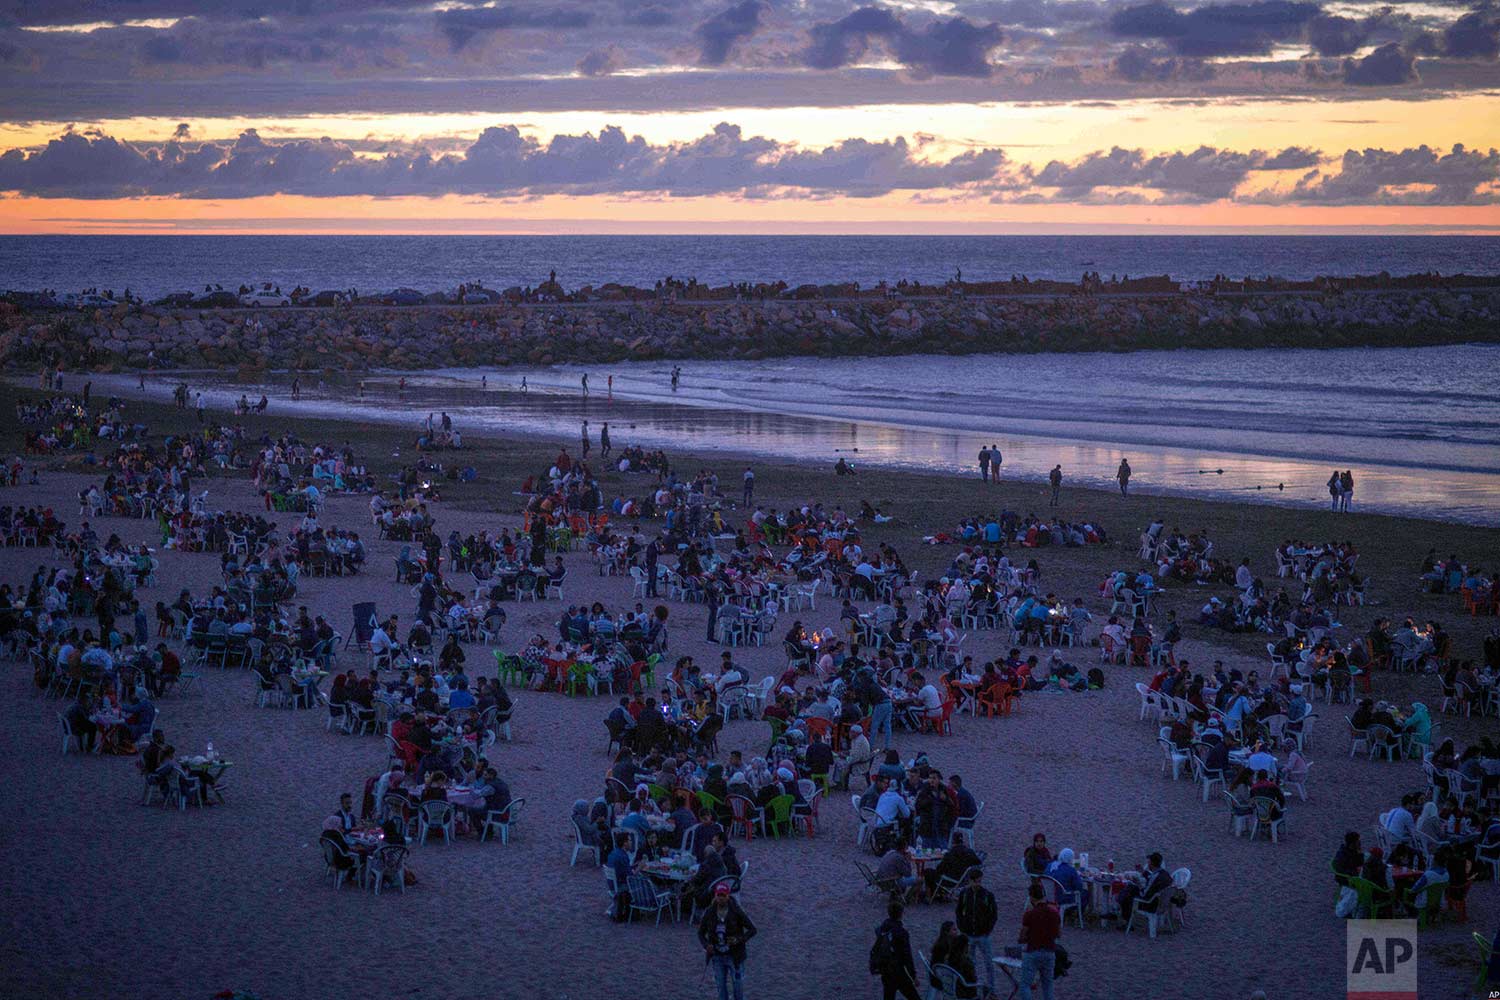  Friends and families gather to break their fast on the beach in the holy month of Ramadan, Rabat, Morocco, Saturday, June 9, 2018. (AP Photo/Mosa'ab Elshamy) 